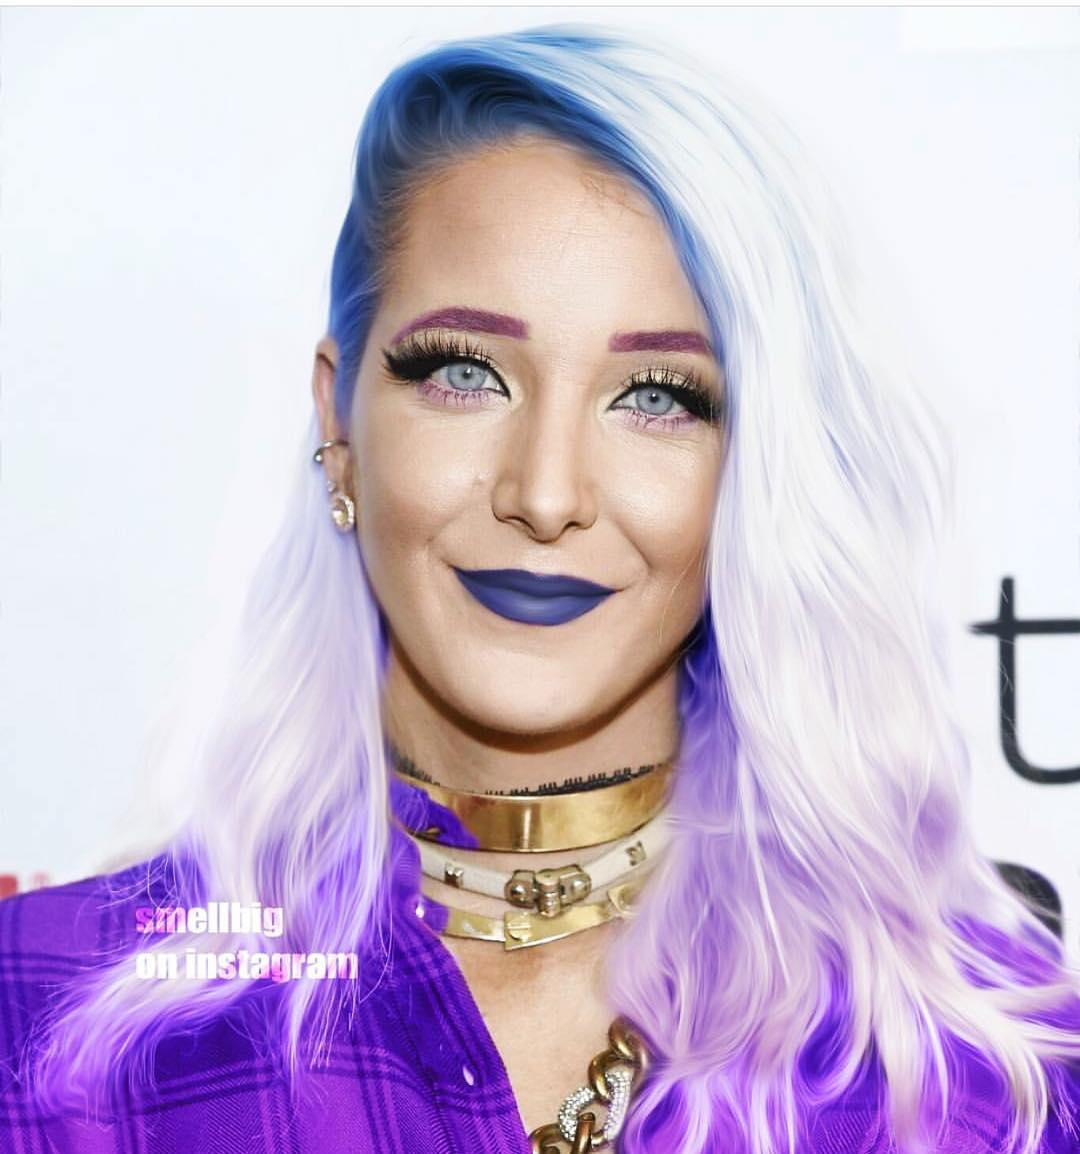 70+ Hot Pictures Of Jenna Marbles Prove She Is The Hottest Youtuber 24